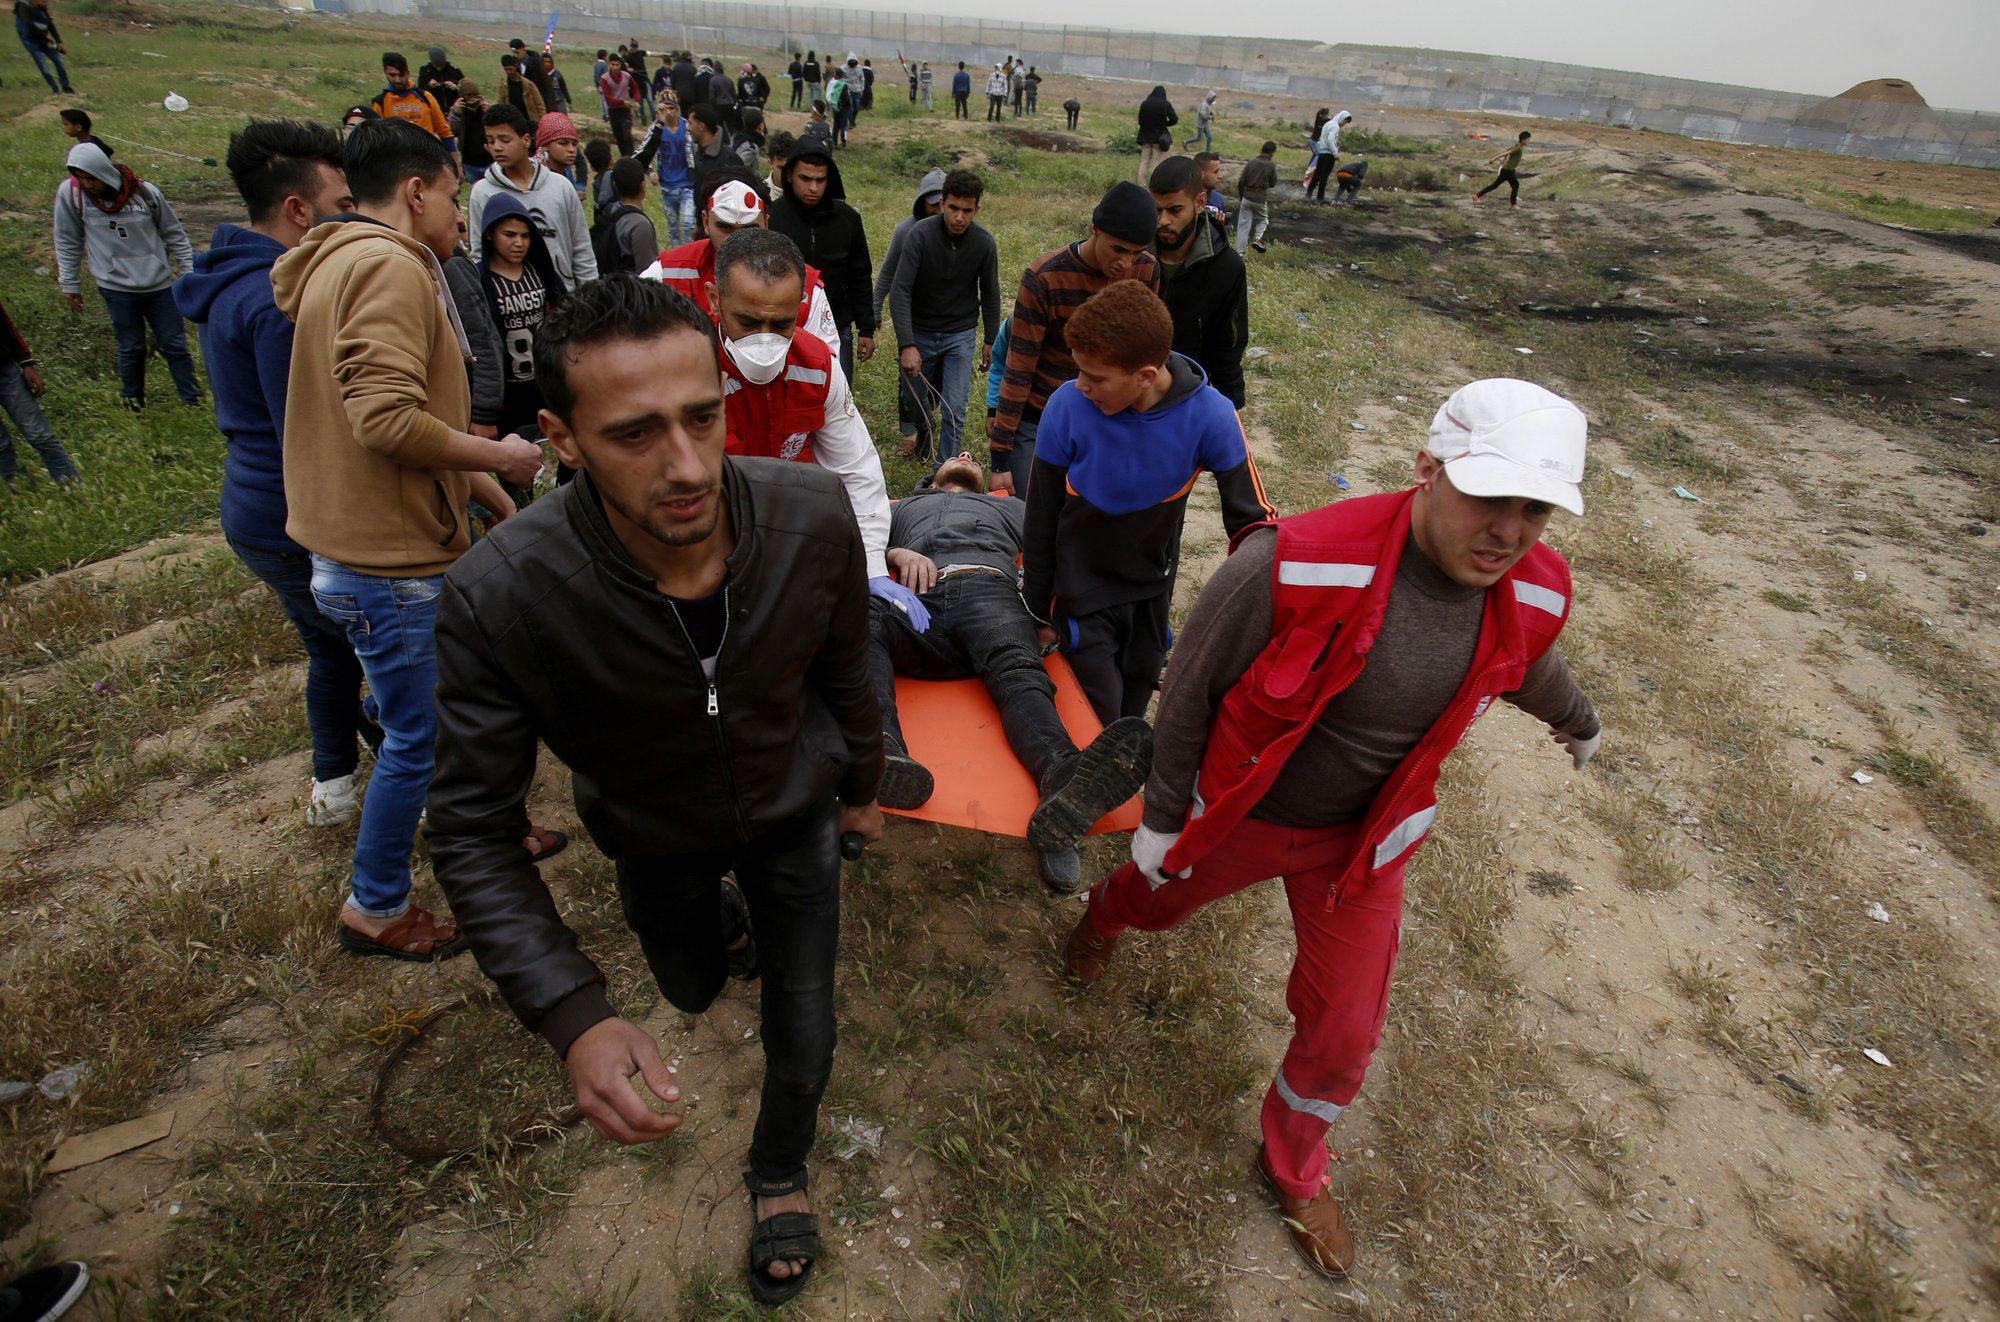 Rockets from Gaza Strip hit Israel; 4 die at border protest